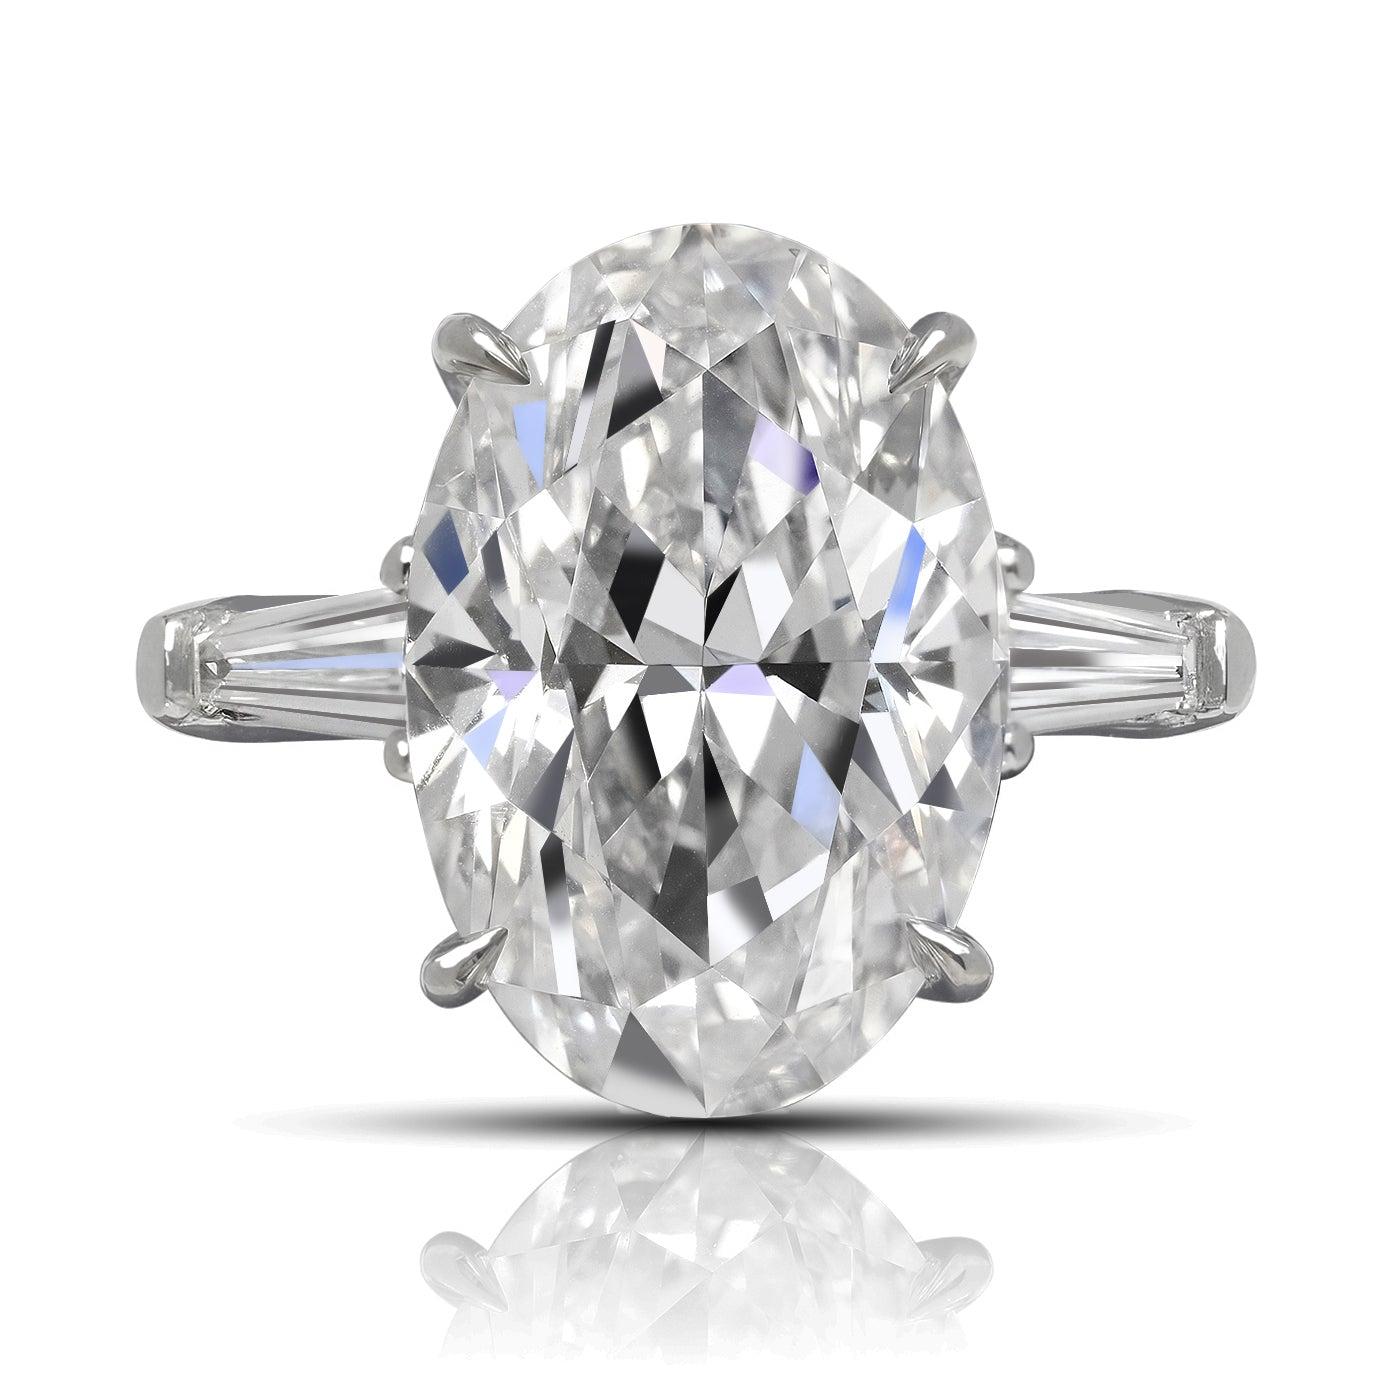 CAROLINE DIAMOND ENGAGEMENT PLATINUM RING BY MIKE NEKTA
 
Center Diamond:
Carat Weight: 8.02 Carats
Color: E*
Clarity: VVS2
Style:  OVAL
*The color of the center diamond  has been permanently modified with high-pressure and high temperature to